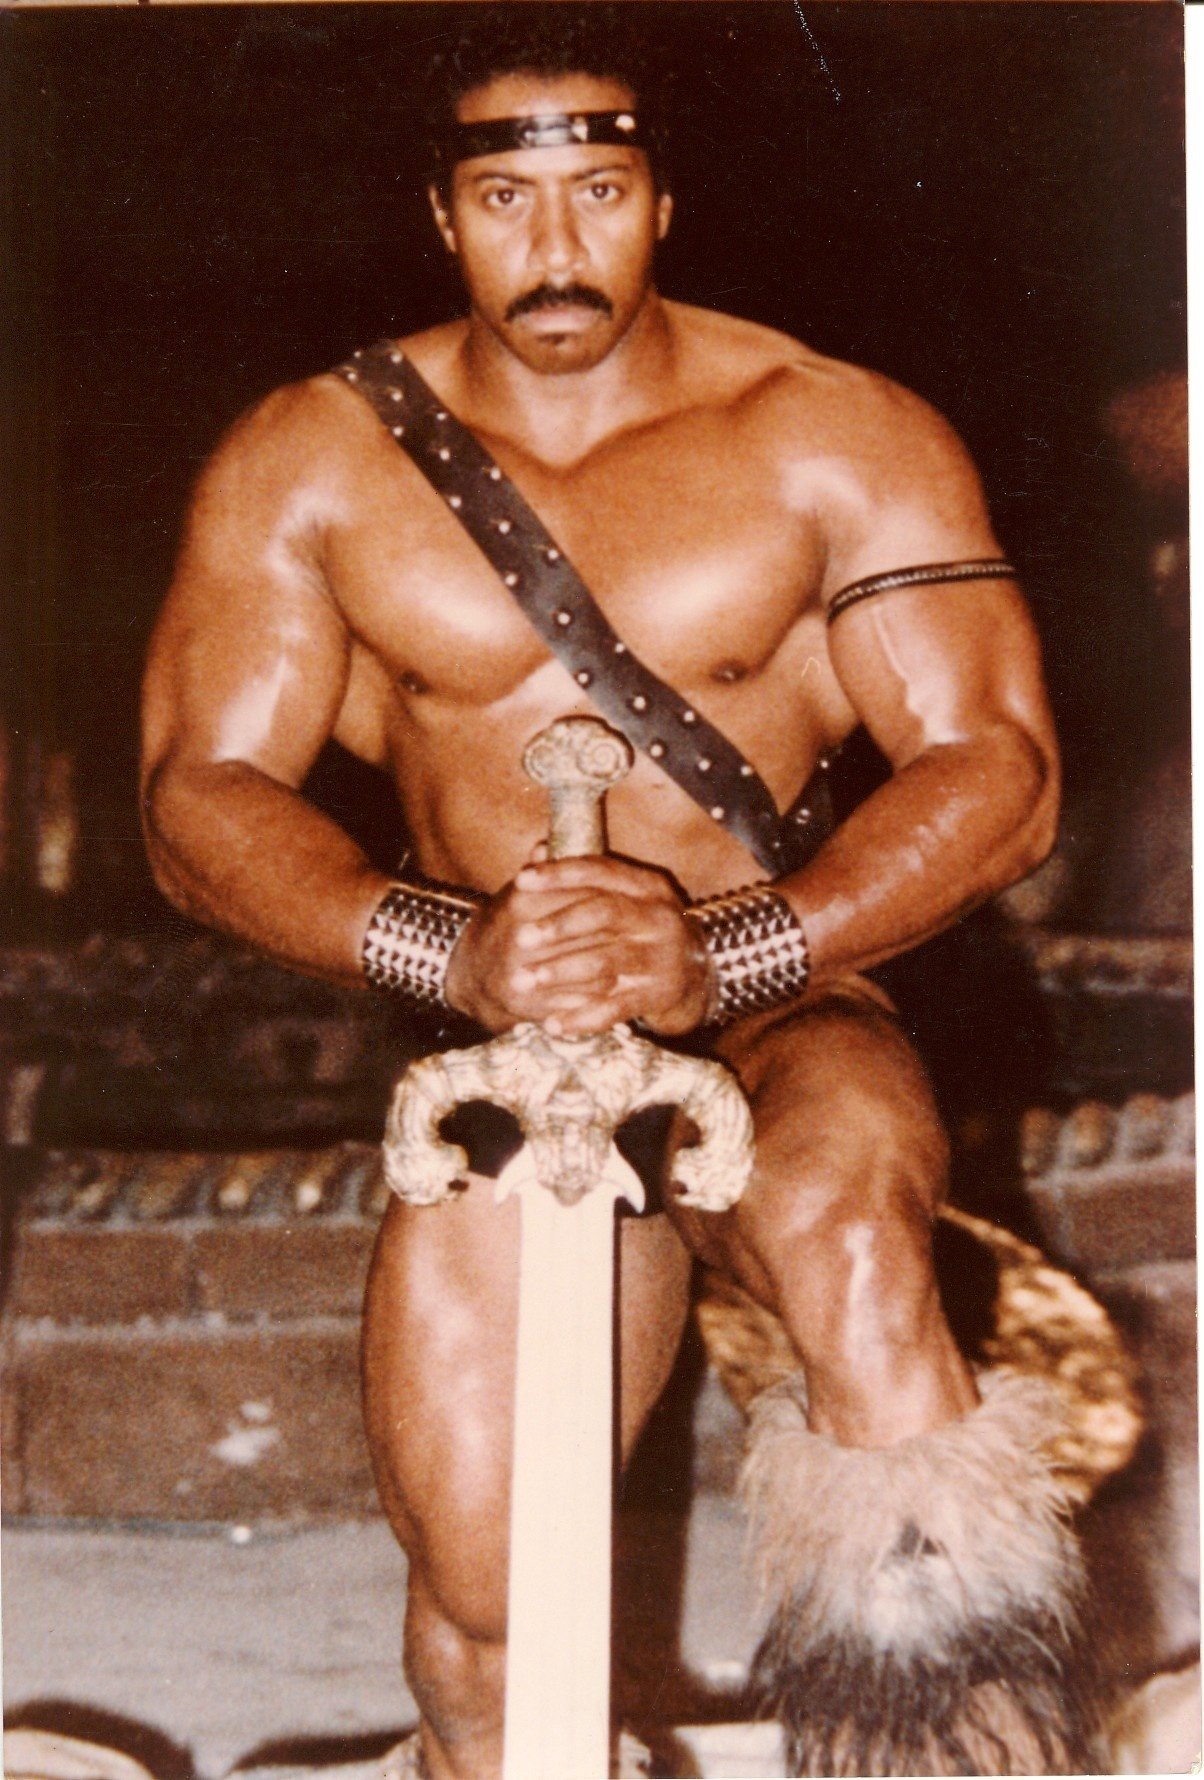 STARRING IN UNIVERSALS STUDIOS LIVE CONAN THE BARBARIAN SWORD AND SORCERY SPECTACULAR (1982-1993)